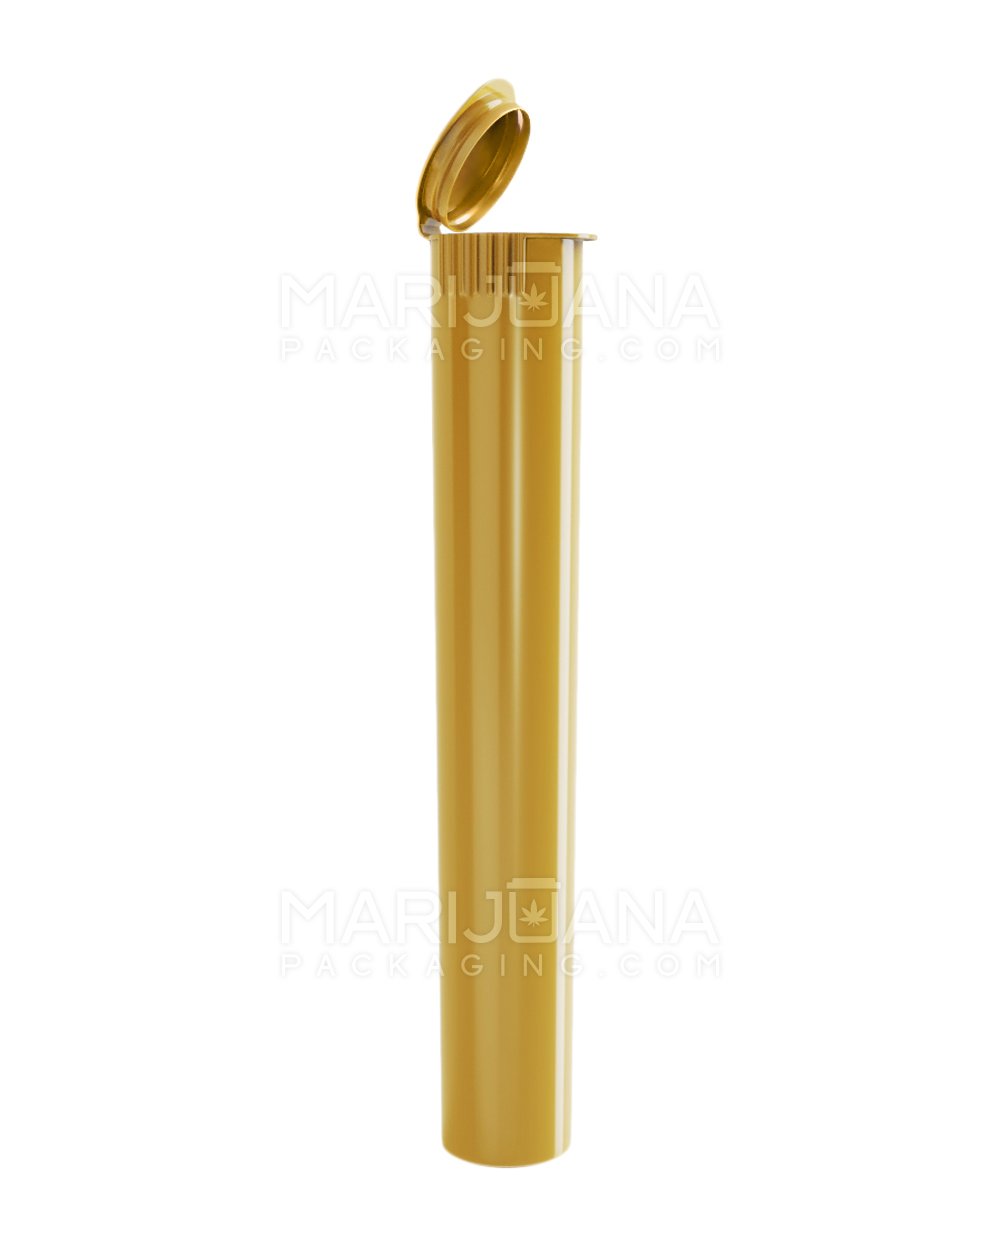 Child Resistant | King Size Pop Top Opaque Plastic Pre-Roll Tubes | 116mm - Gold - 1000 Count - 1